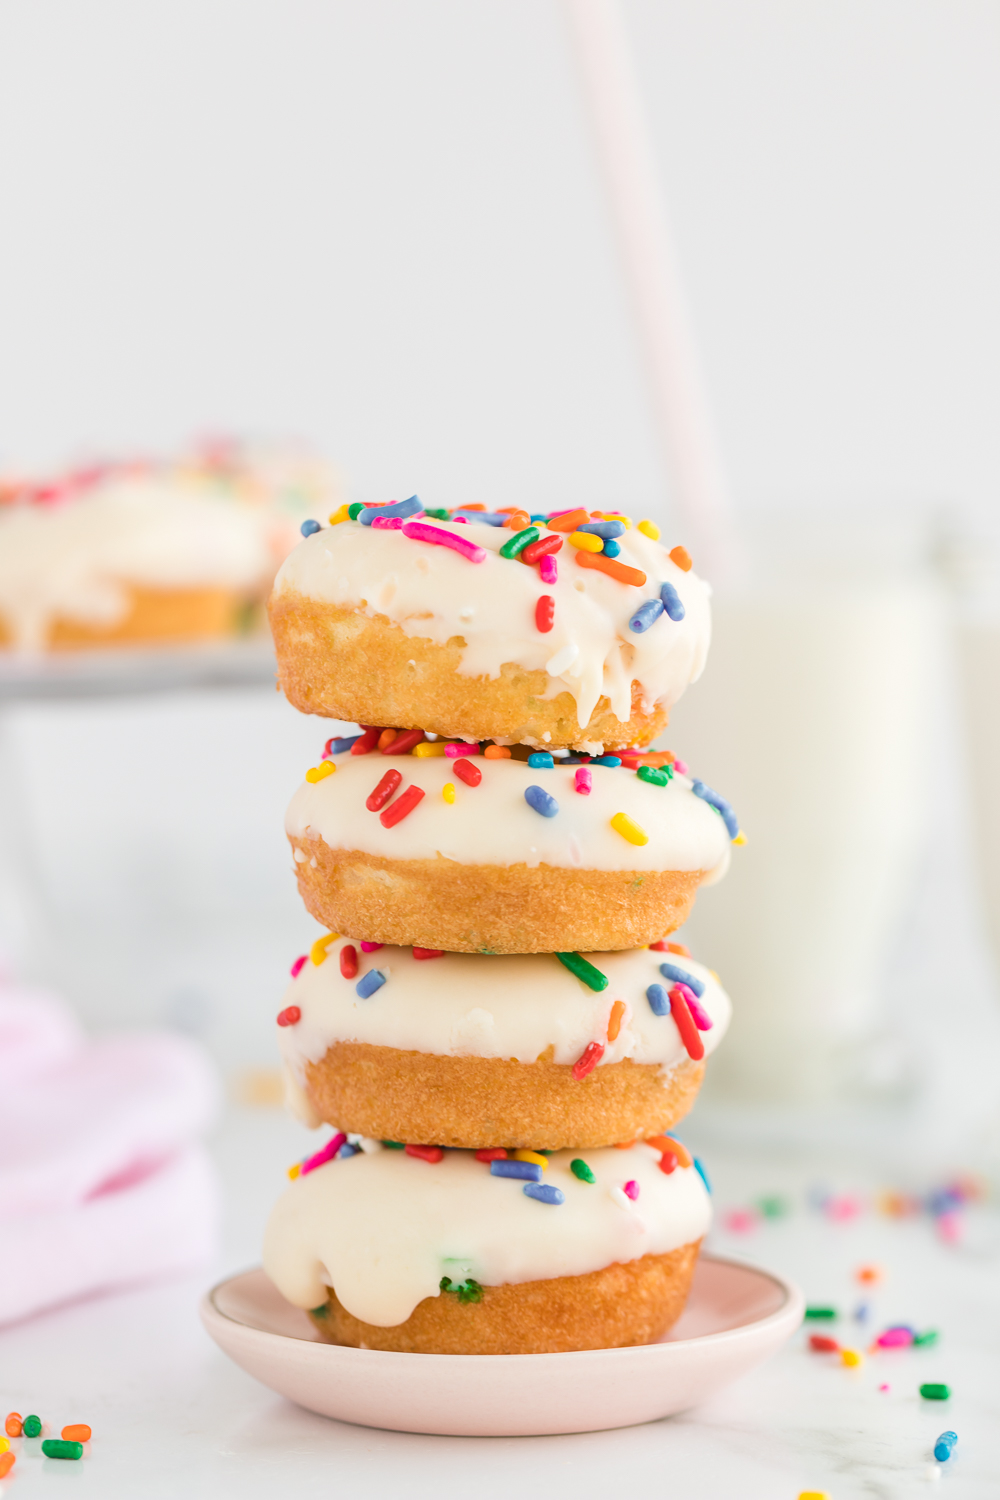 Mini Funfetti Cake Mix Donuts: a delicious and fun treat the kids will love to make and eat! You only need a Funfetti cake mix, sprinkles, and some icing to make this colorful treat. 